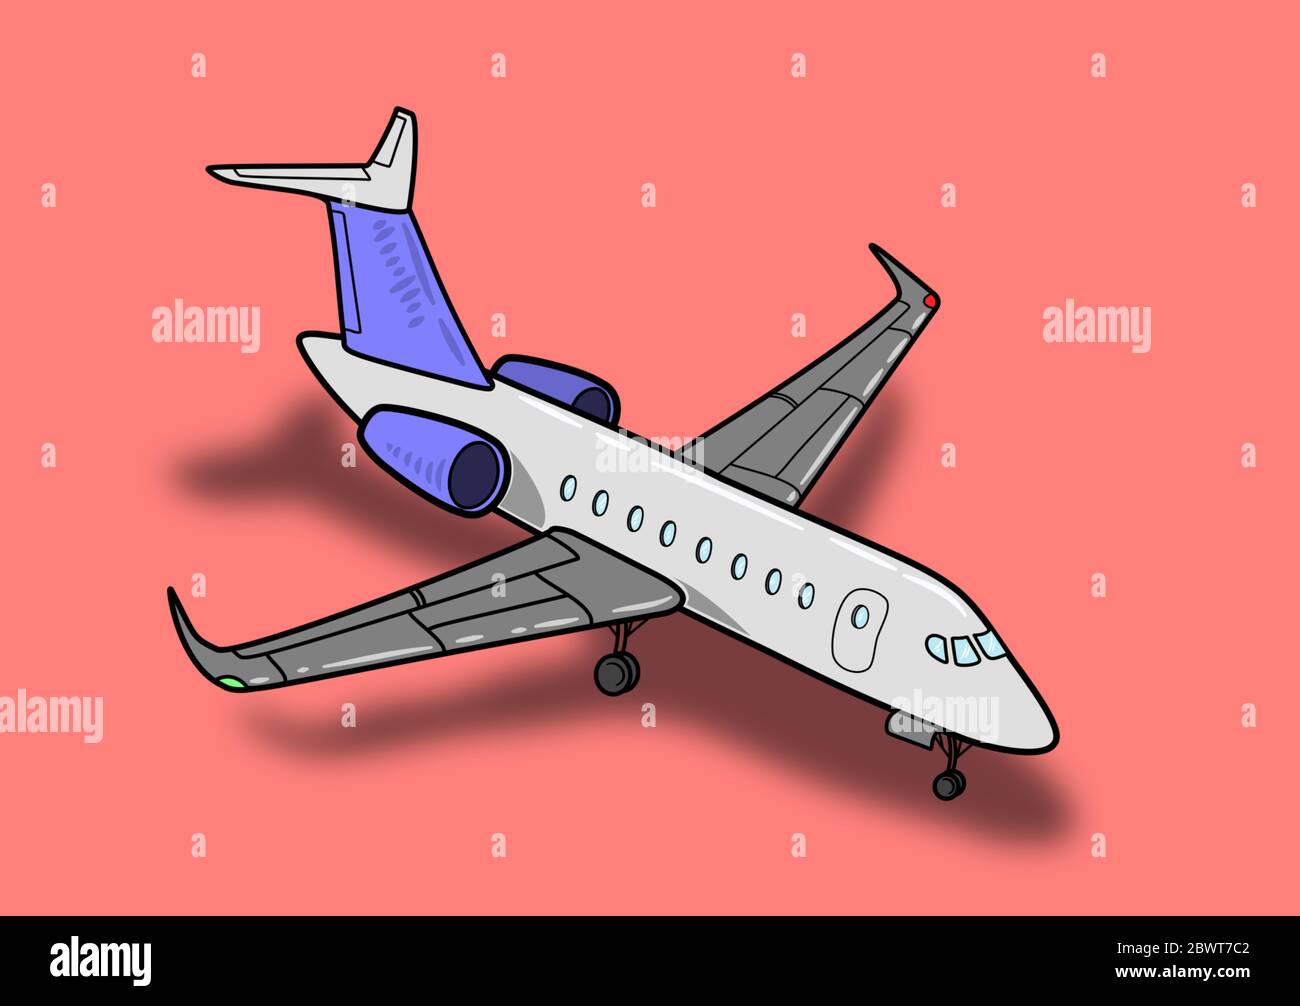 Airplane on pink background Stock Photo